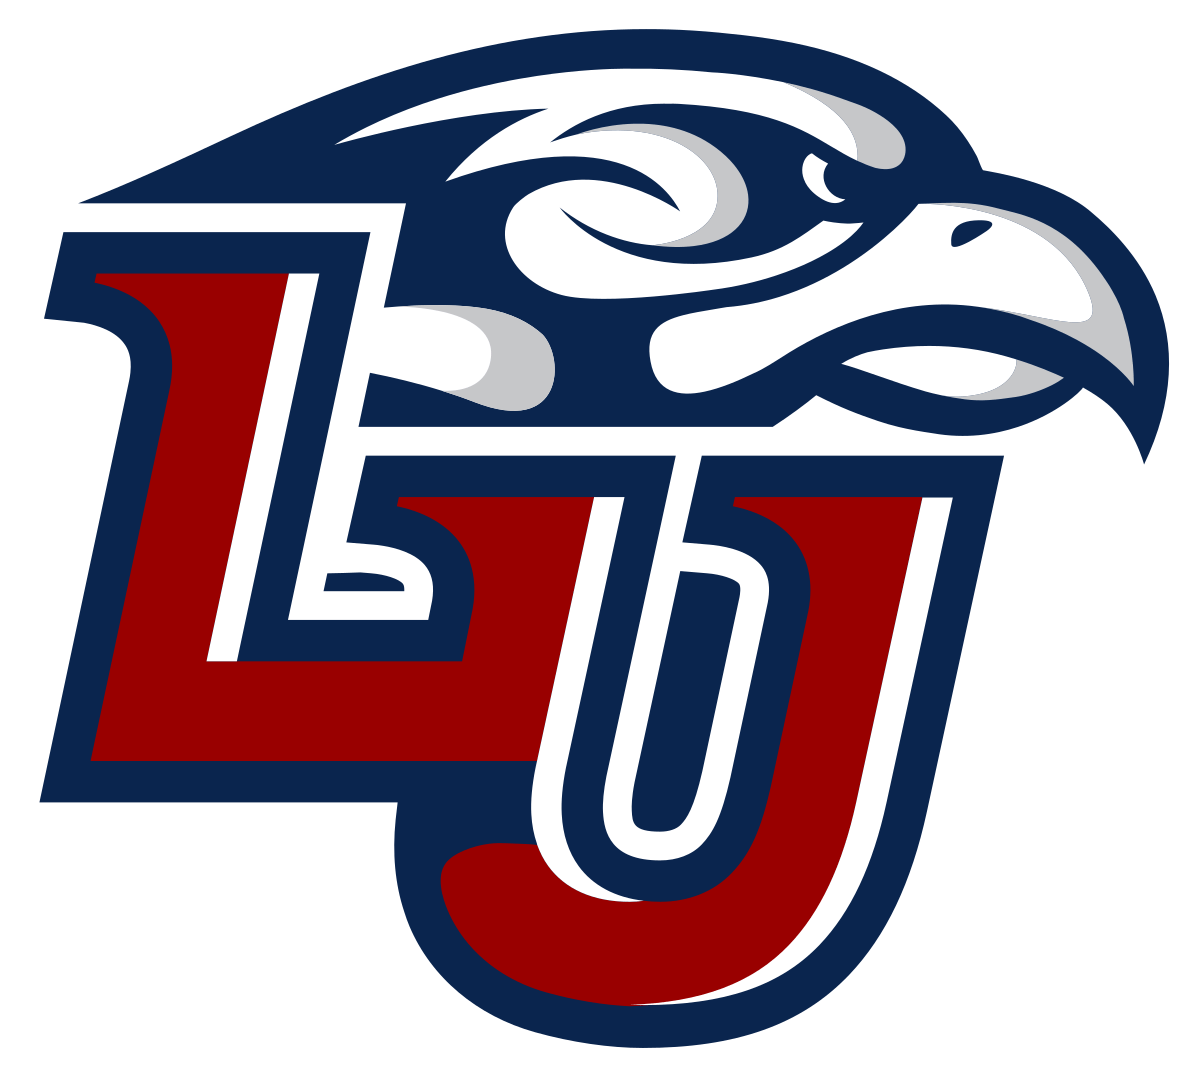 Red and Blue Sports Logo - Liberty Flames and Lady Flames